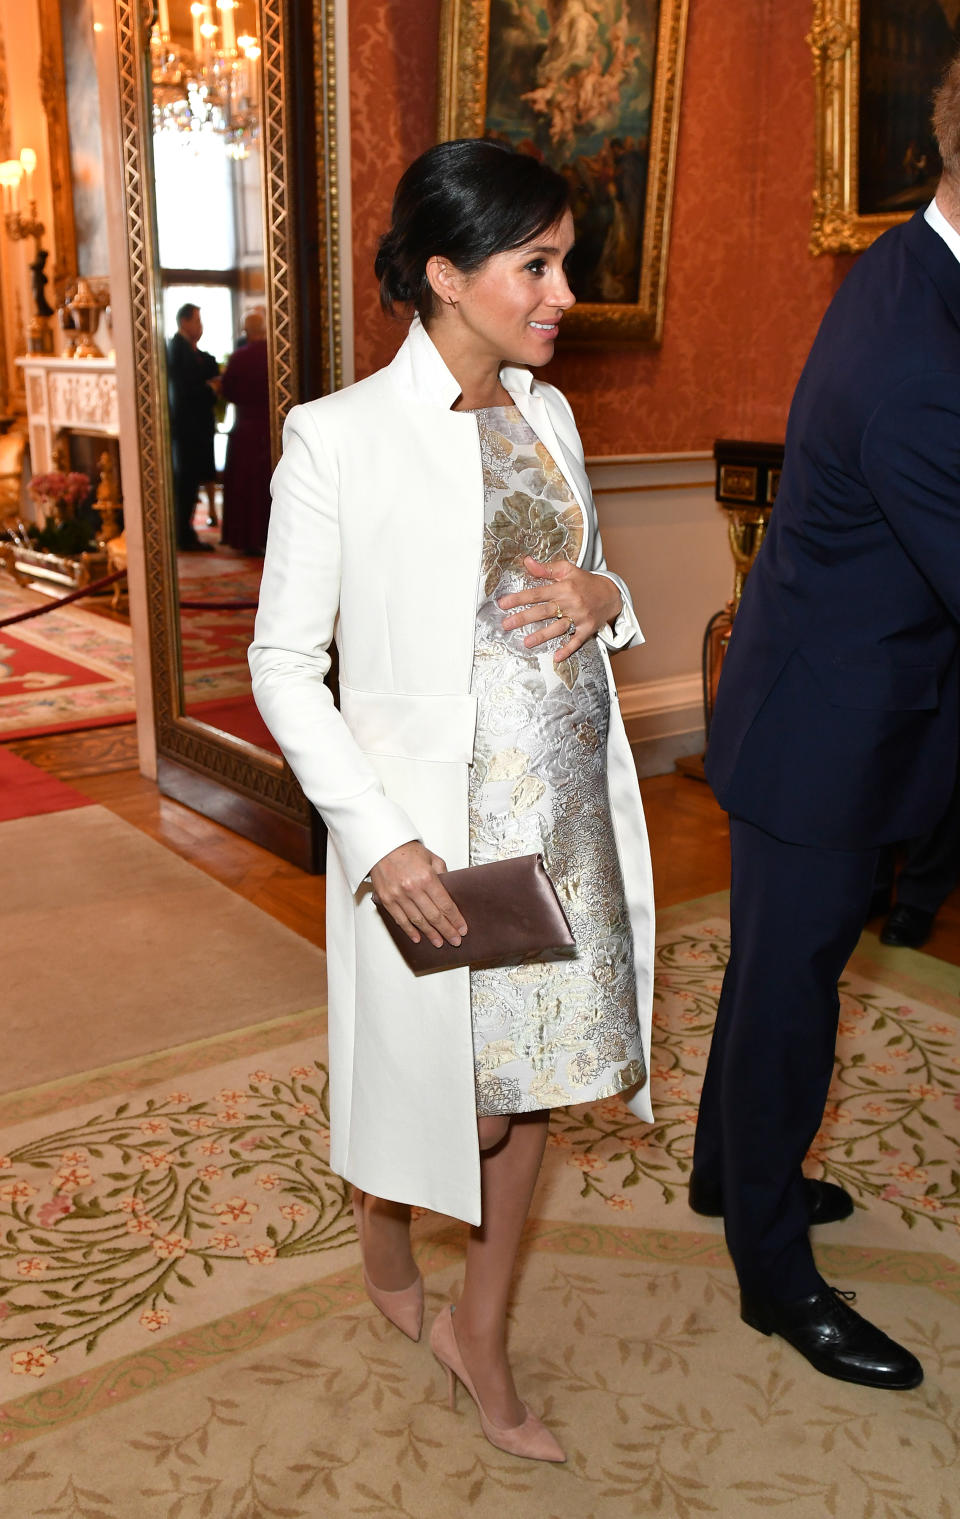 Meghan Markle wore an embroidered dress for the occasion. (Photo: Getty Images)